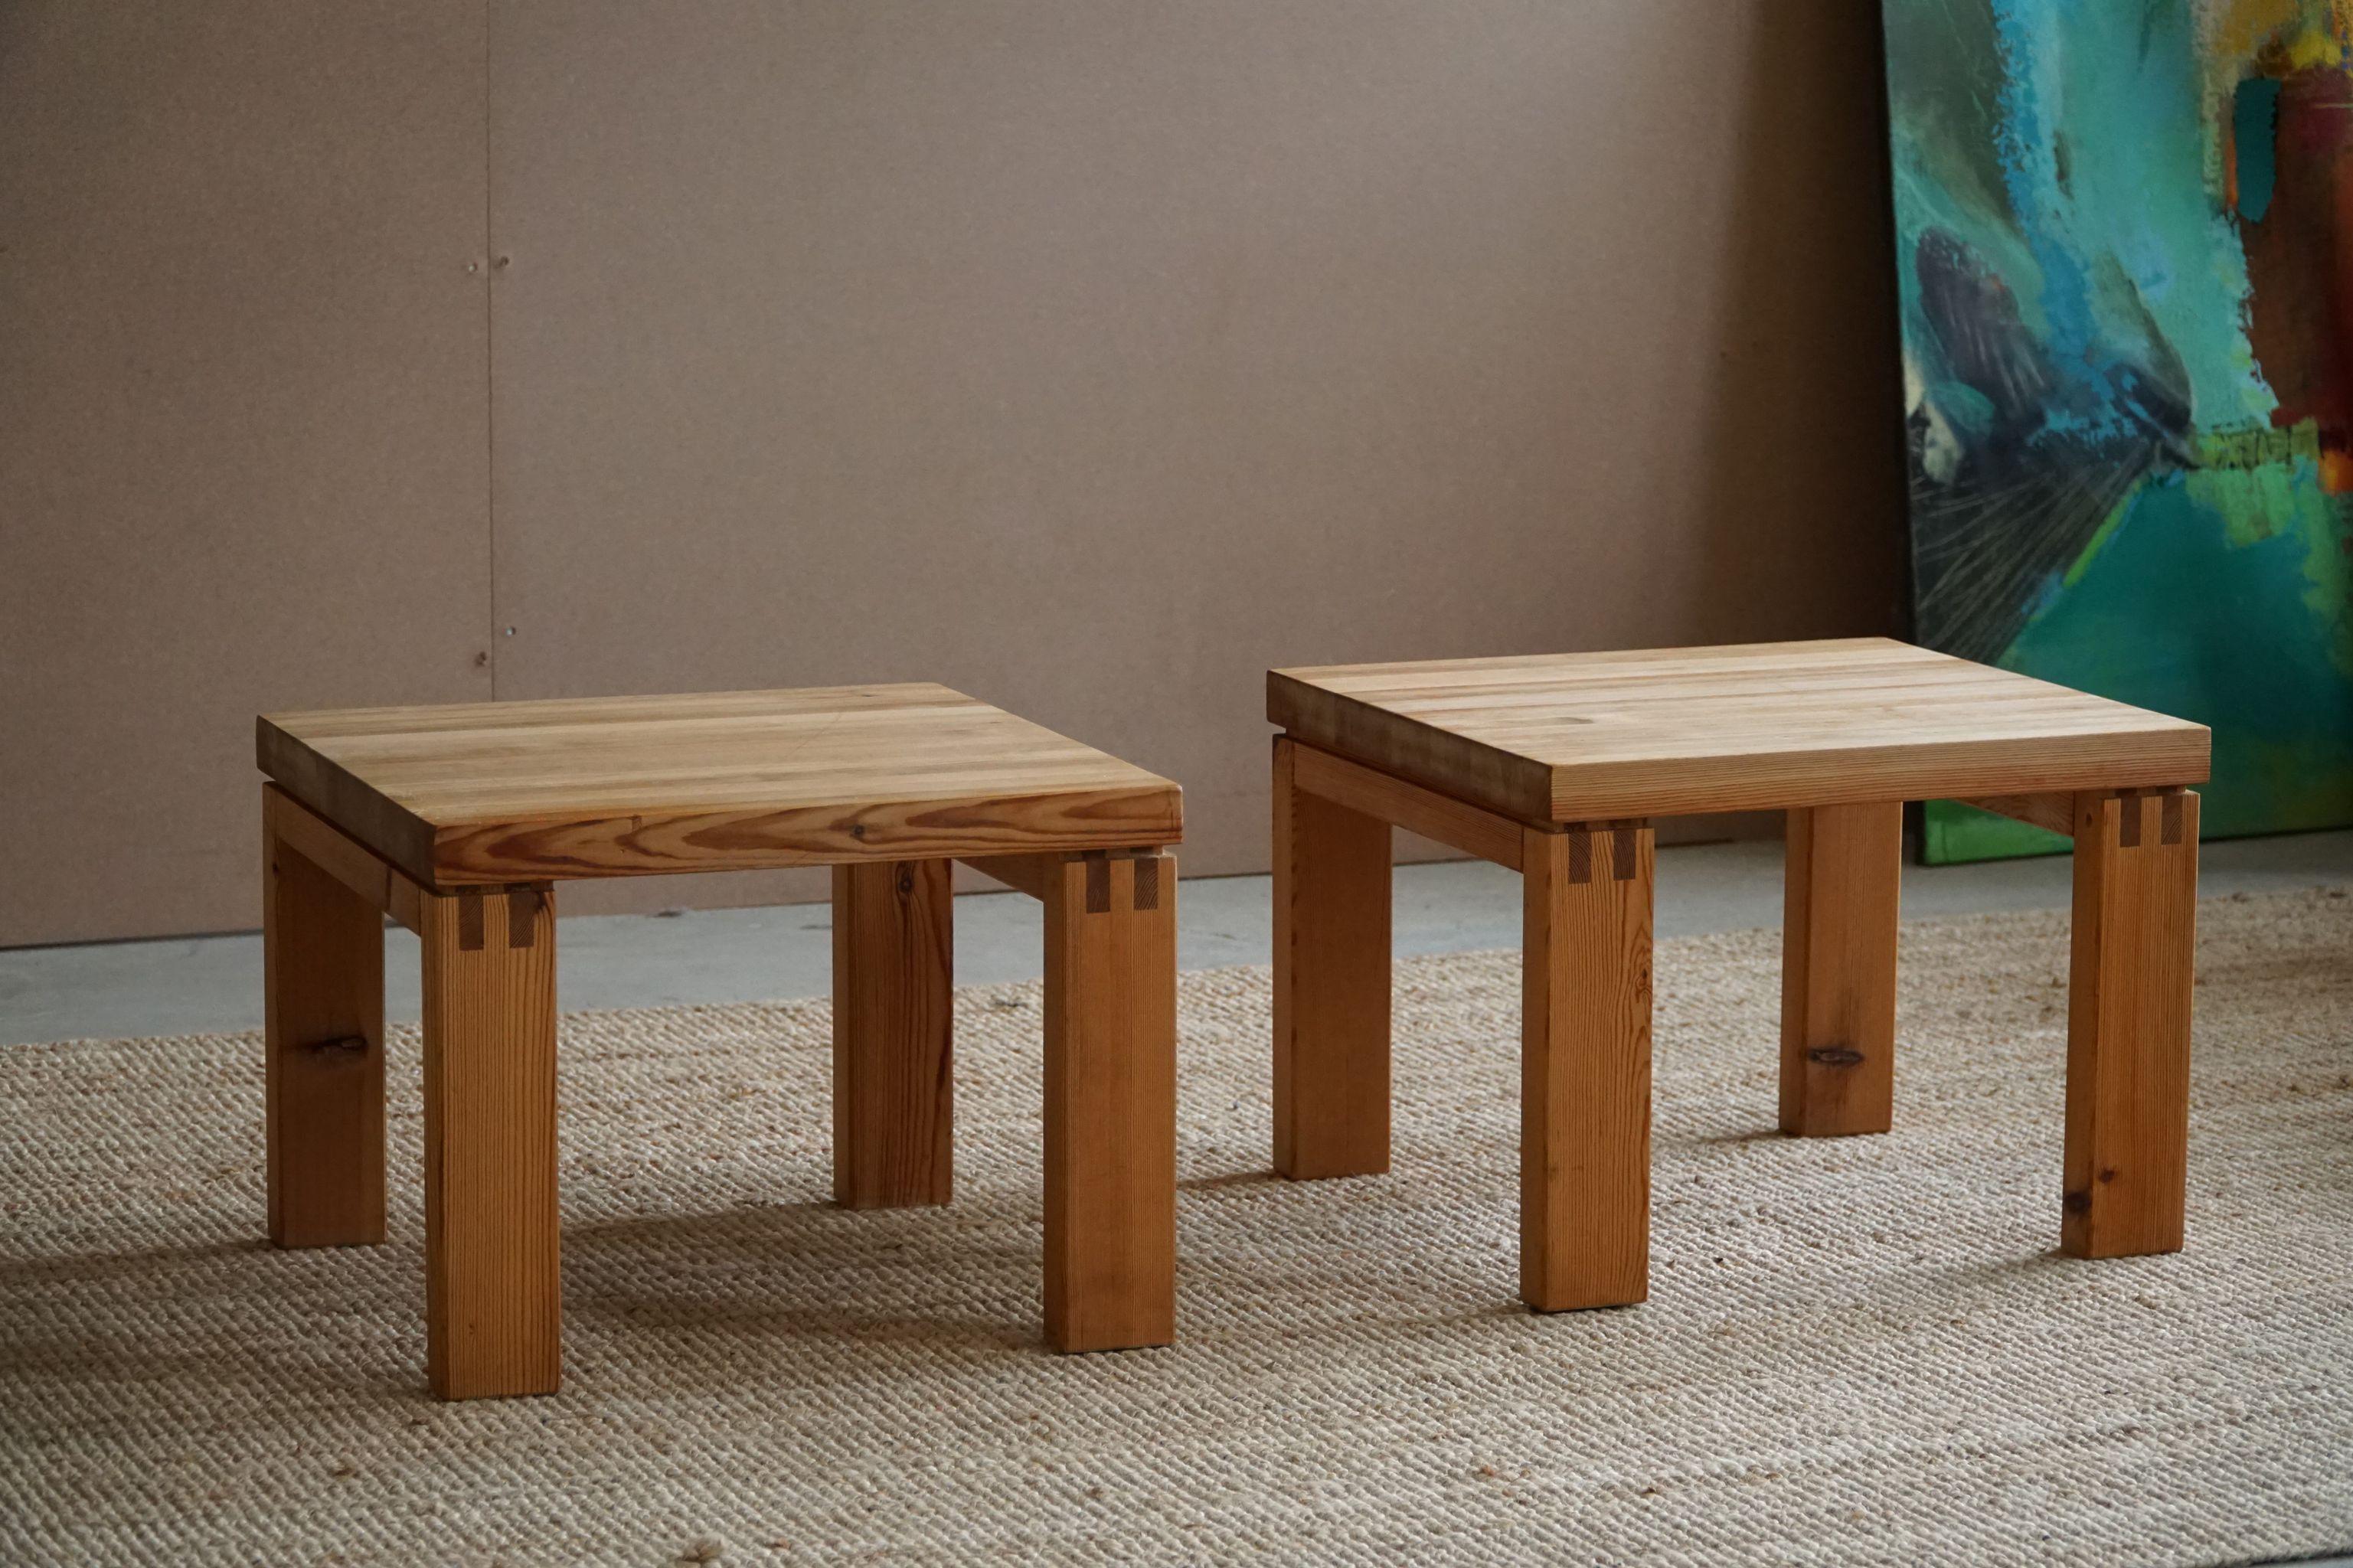 Late 20th Century Pair of Danish Modern Brutalist Side Tables in Solid Pine, Made by Nytibo, 1970s